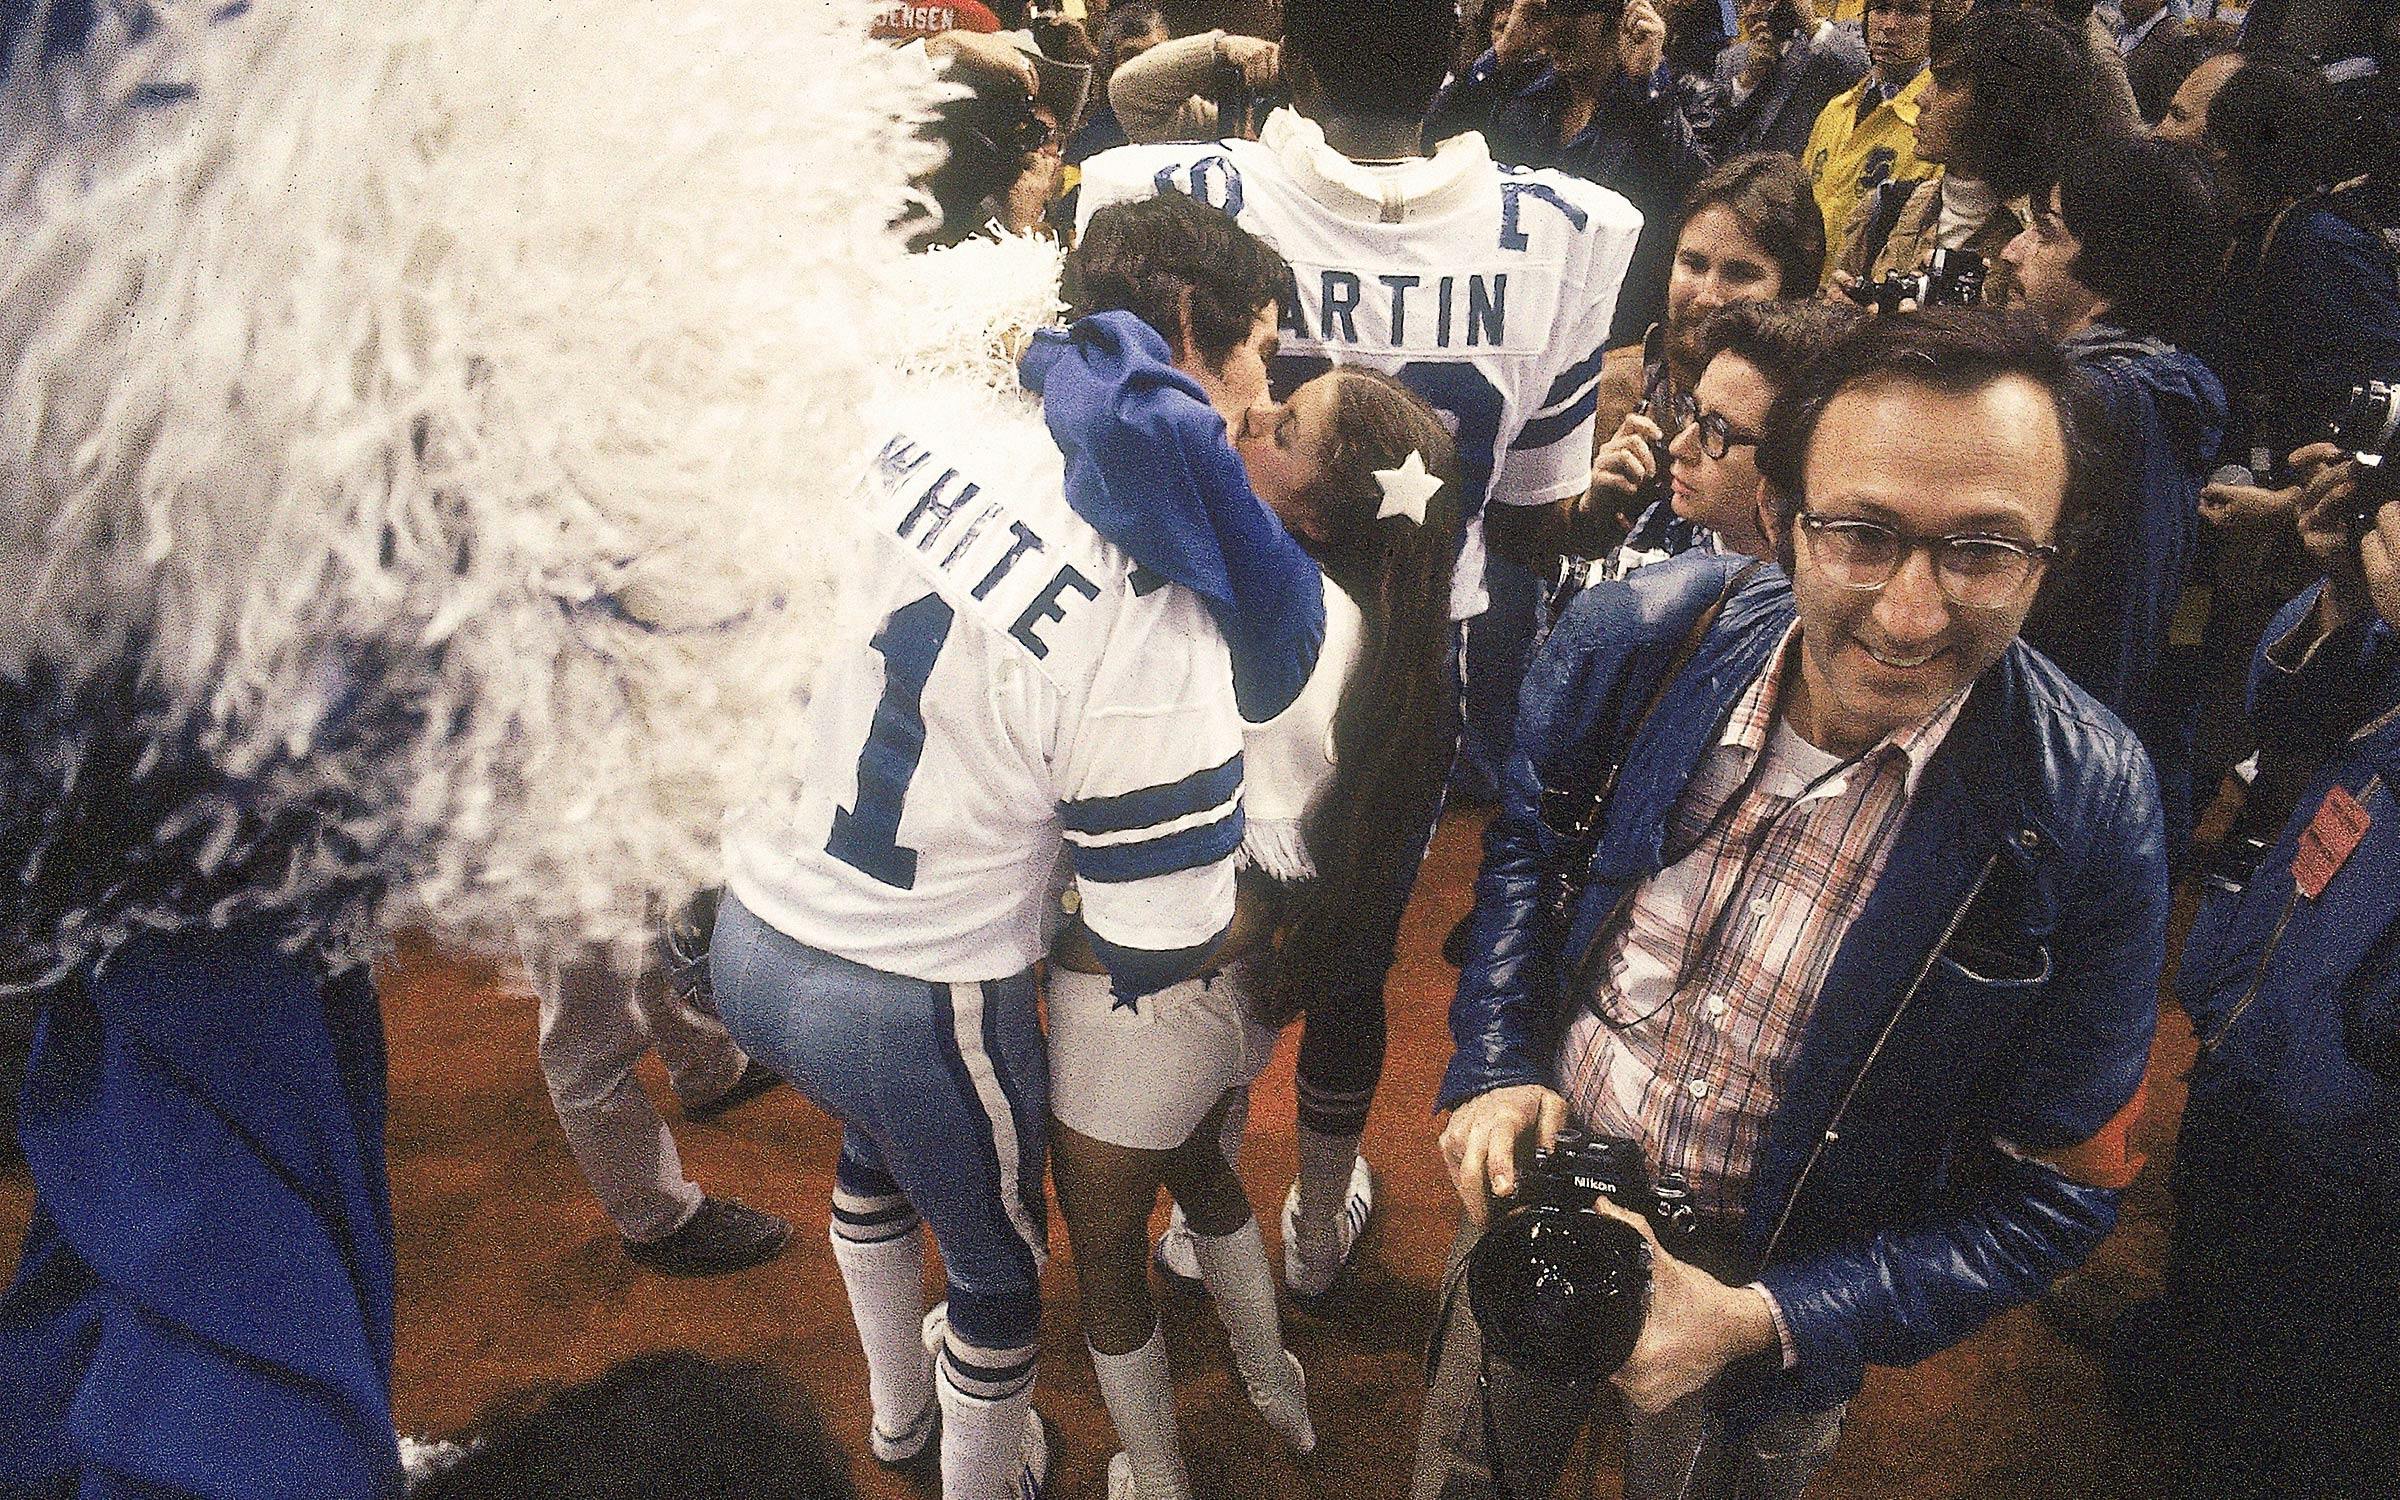 Over 100 Photos from the Dallas Cowboys Record Breaking Win